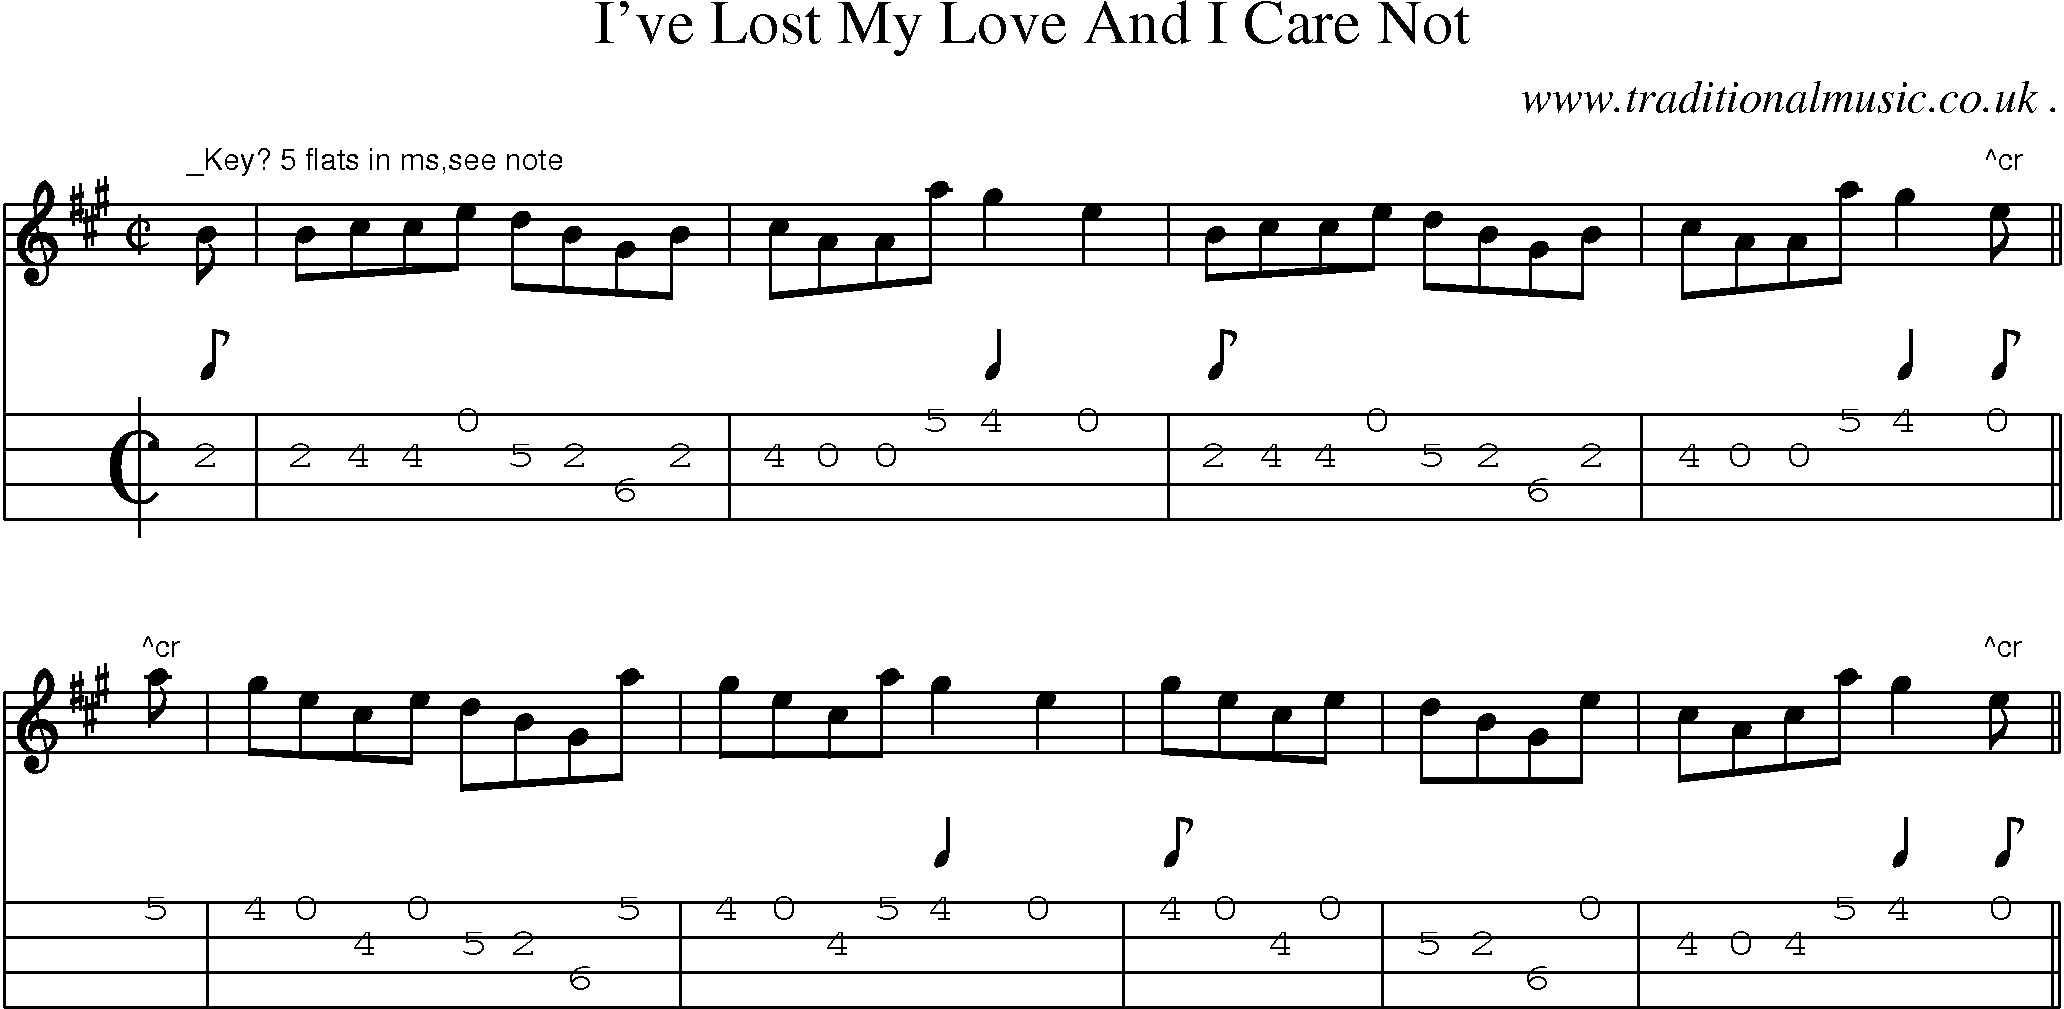 Sheet-Music and Mandolin Tabs for Ive Lost My Love And I Care Not